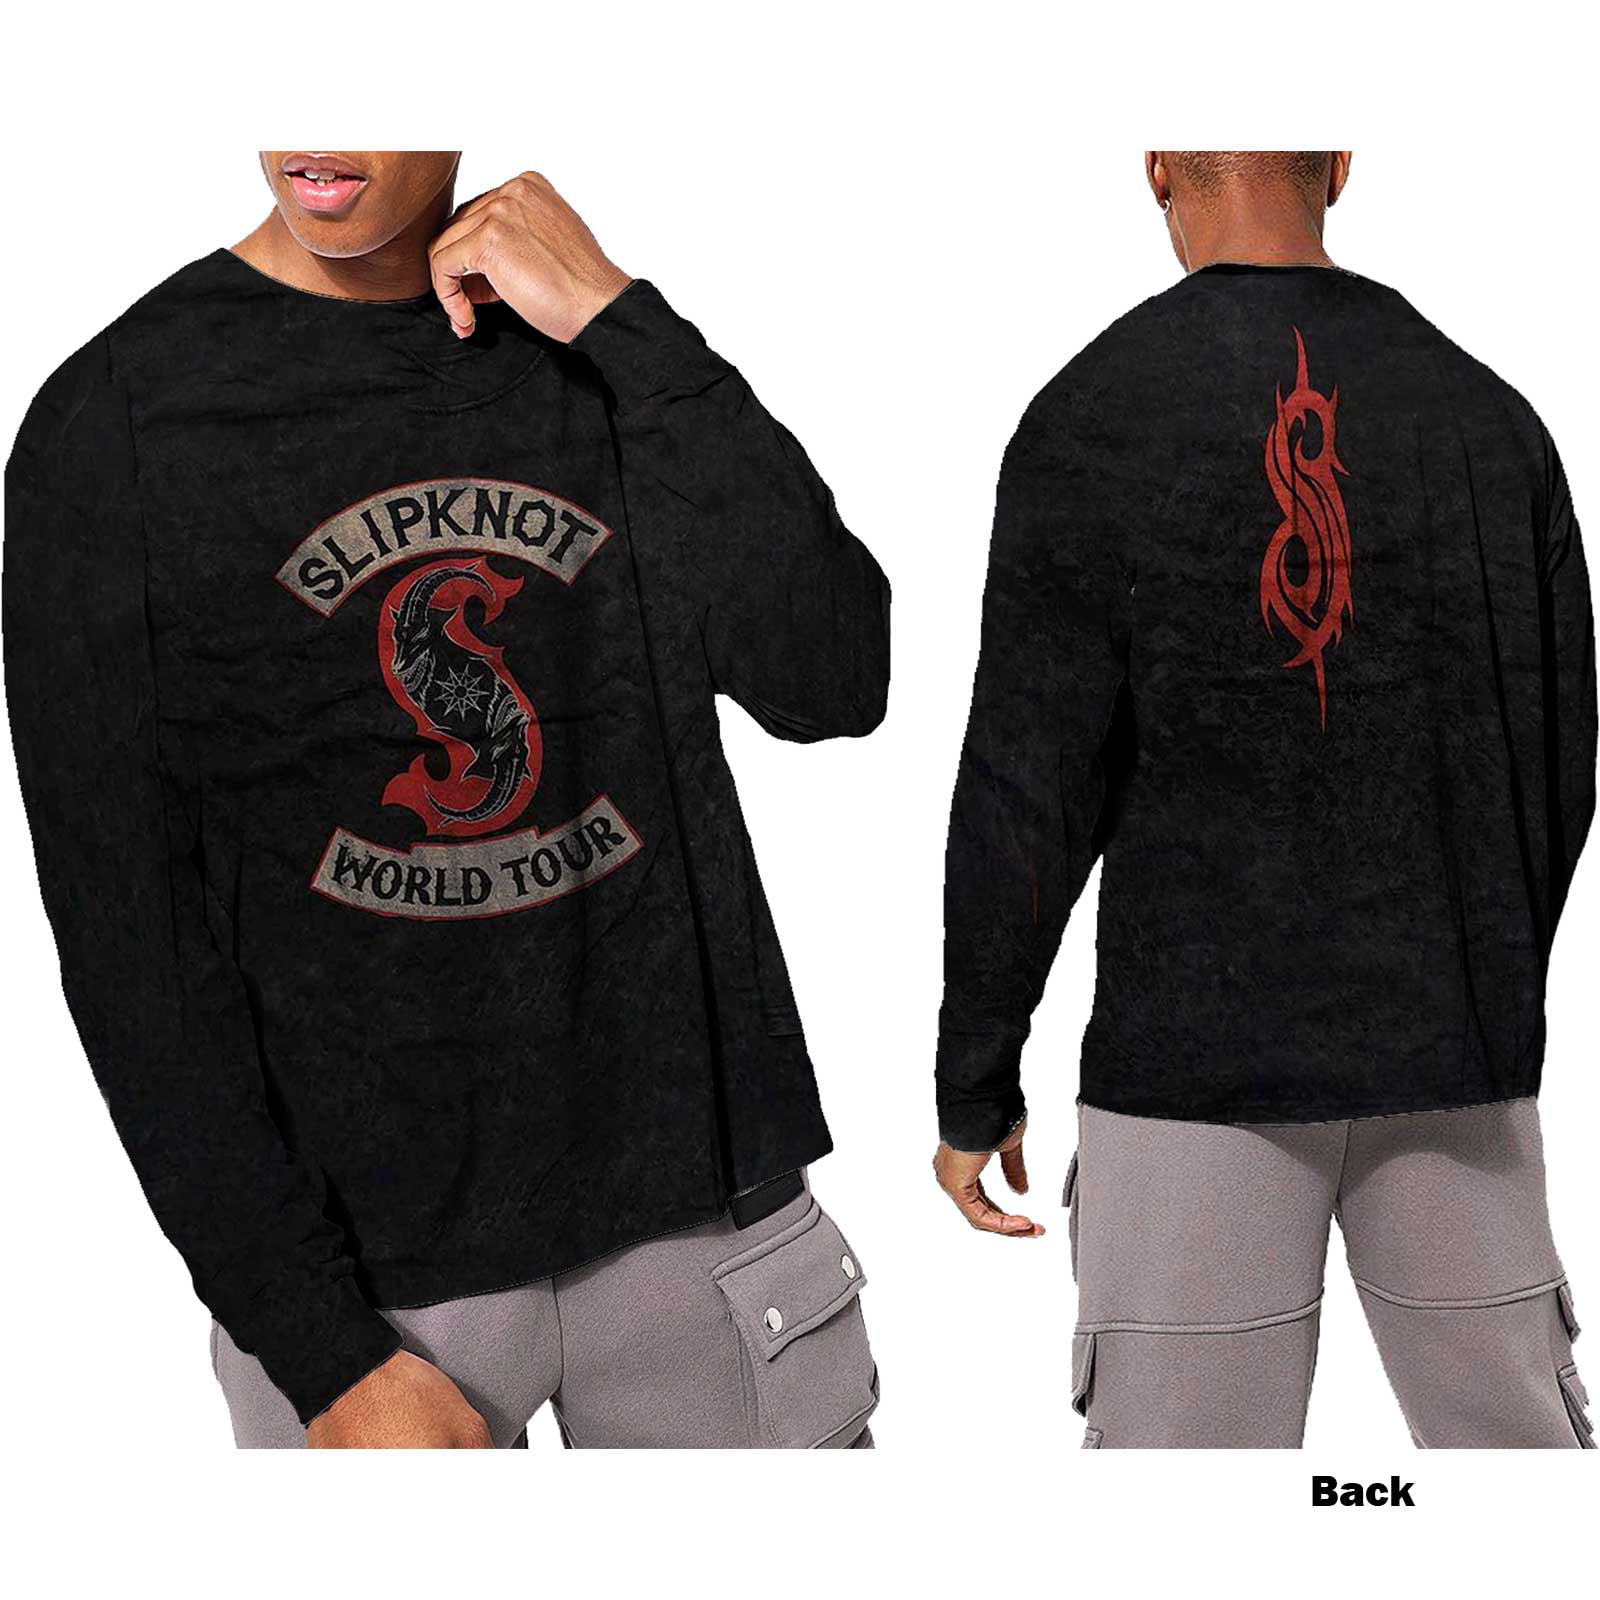 Collection Up Print) (XXXX-Large) Sleeve Unisex (Wash Back Slipknot T-Shirt & Long Patched